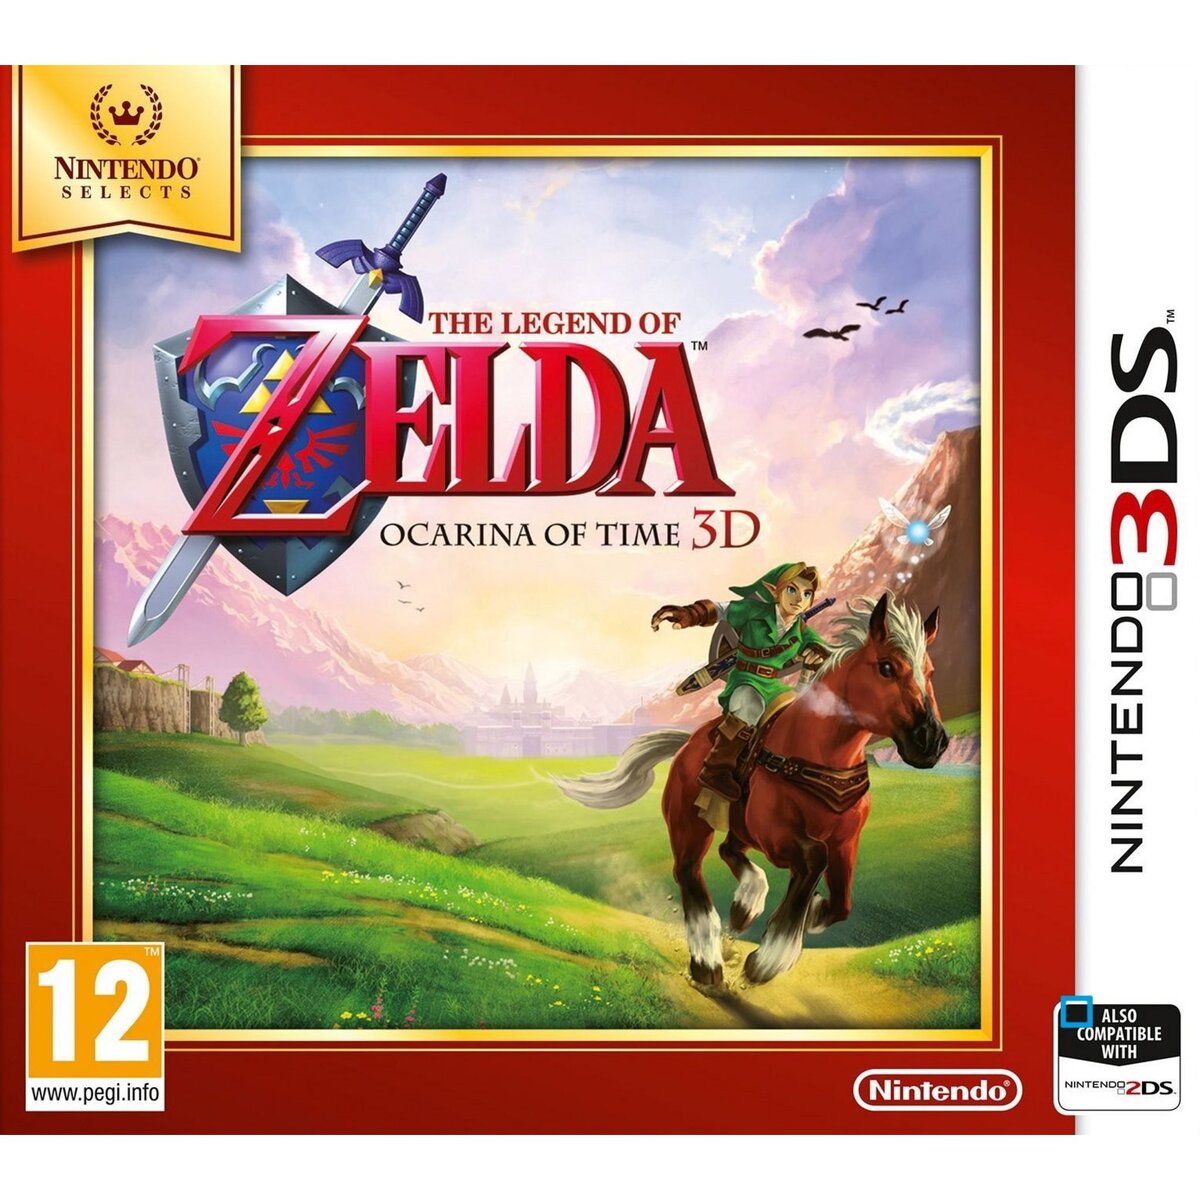 The Legend of Zelda - Ocarina Of Time 3D -Selects